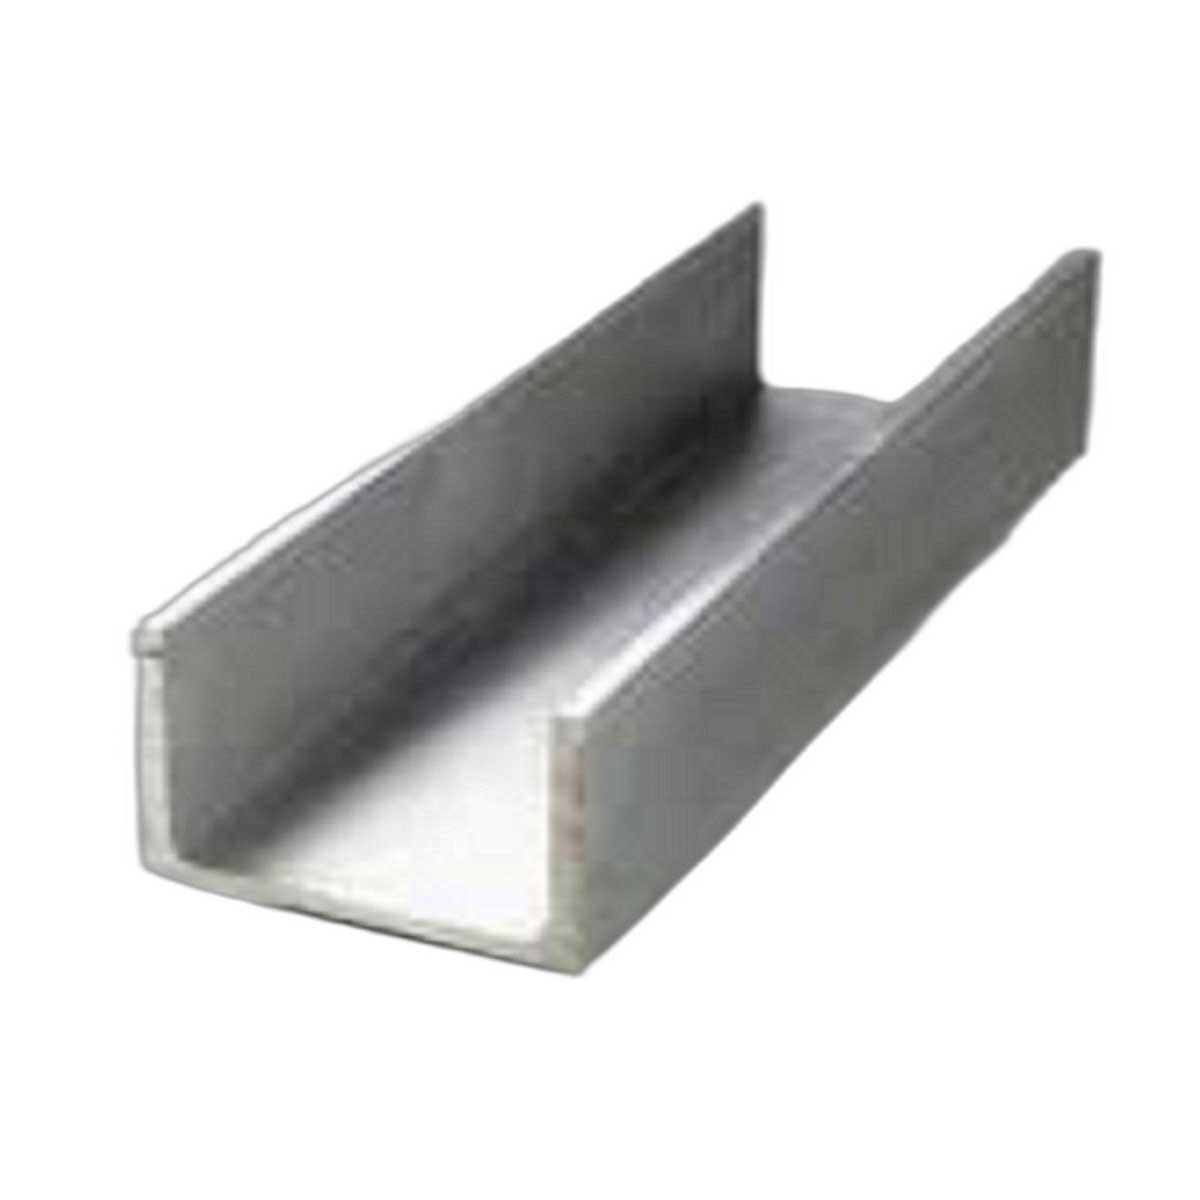 Aluminium U Shaped Channel Manufacturers, Suppliers in Pilibhit